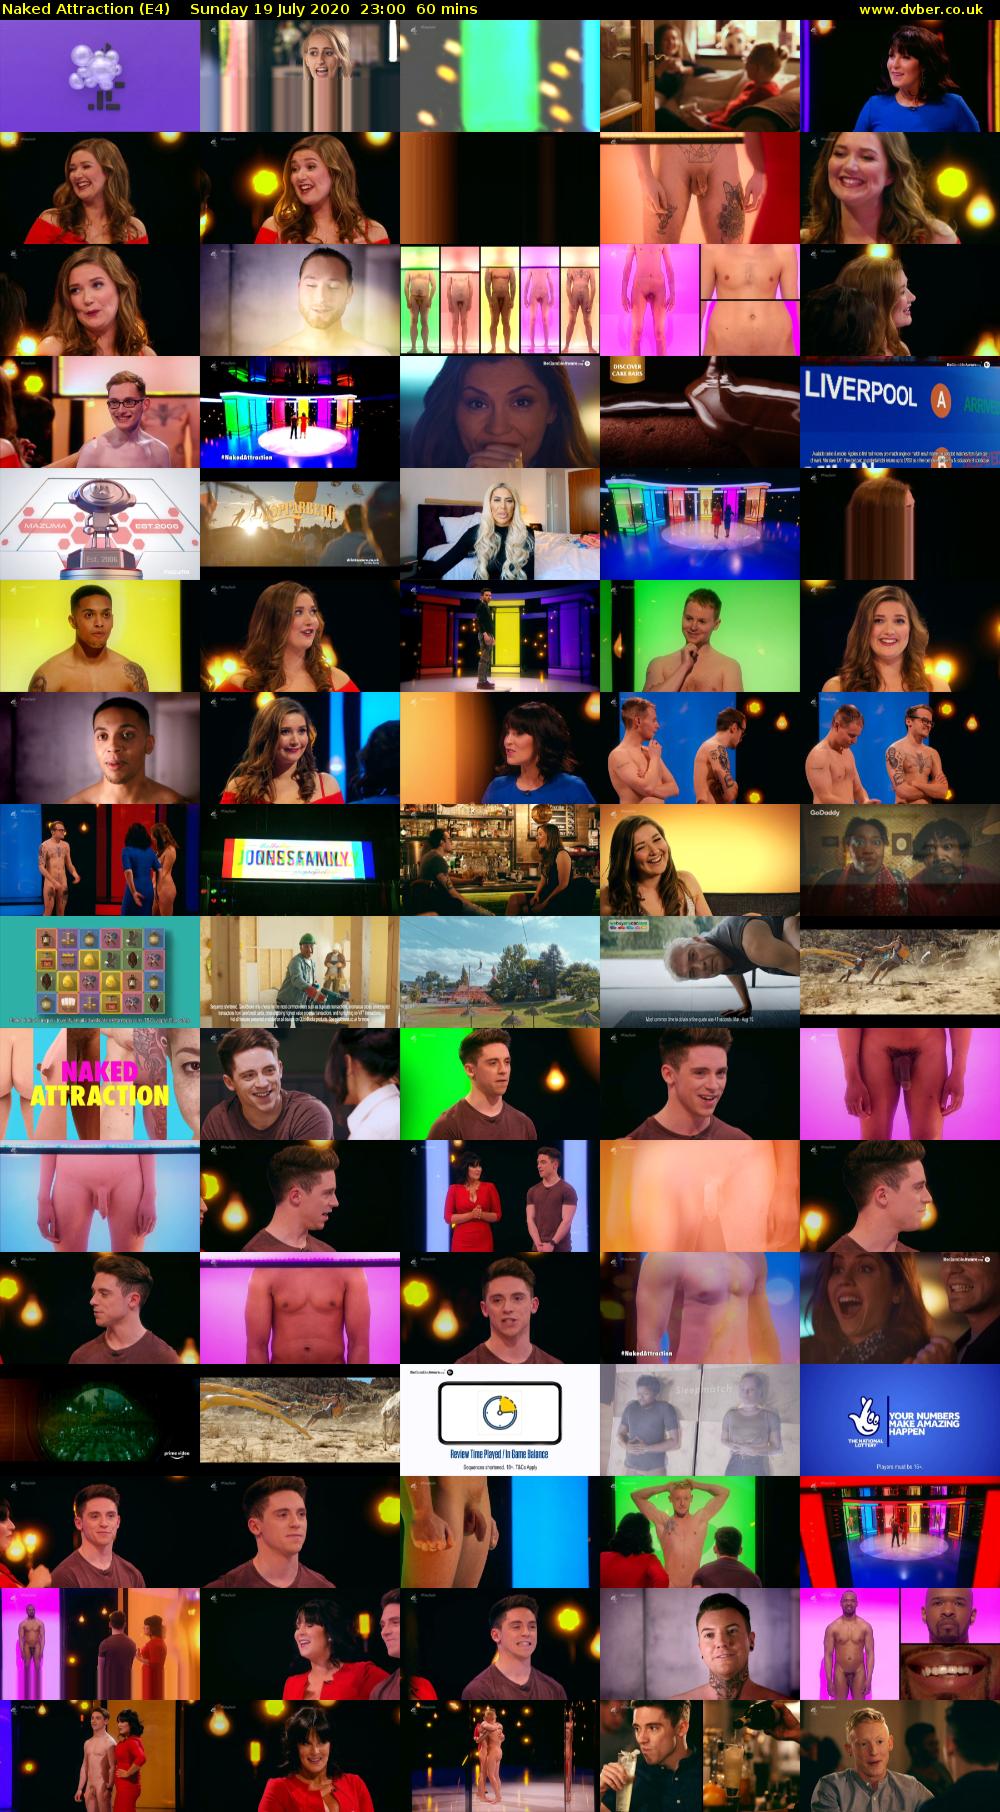 Naked Attraction (E4) Sunday 19 July 2020 23:00 - 00:00